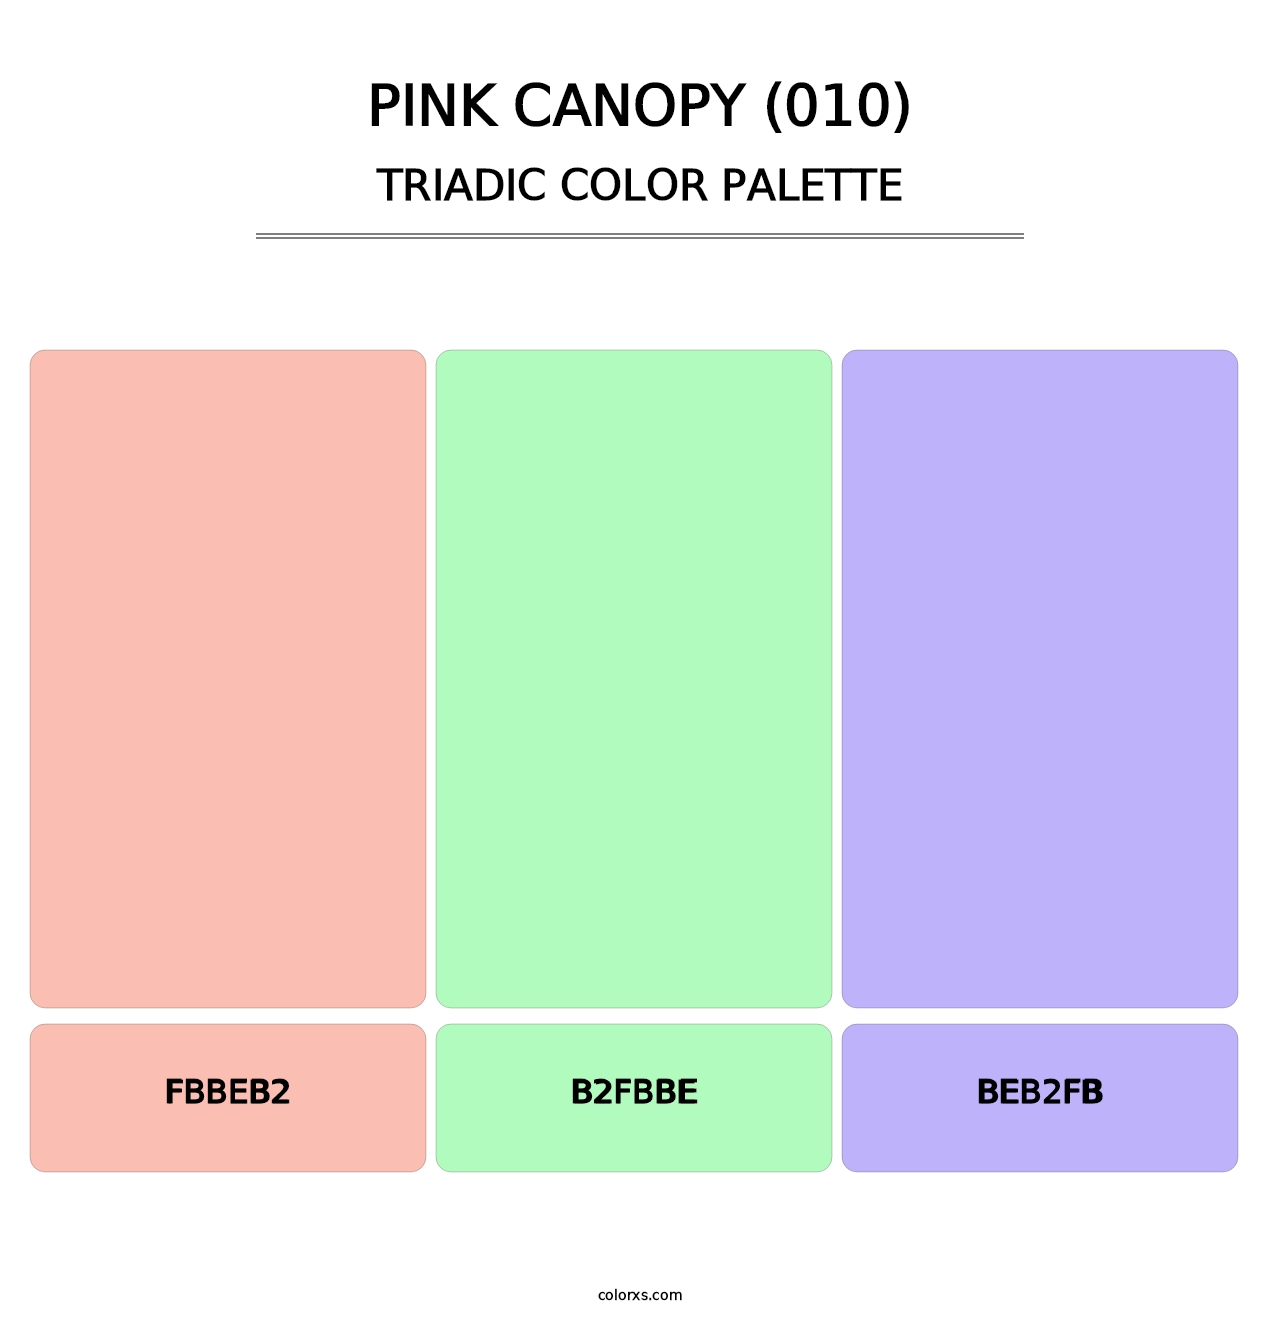 Pink Canopy (010) - Triadic Color Palette